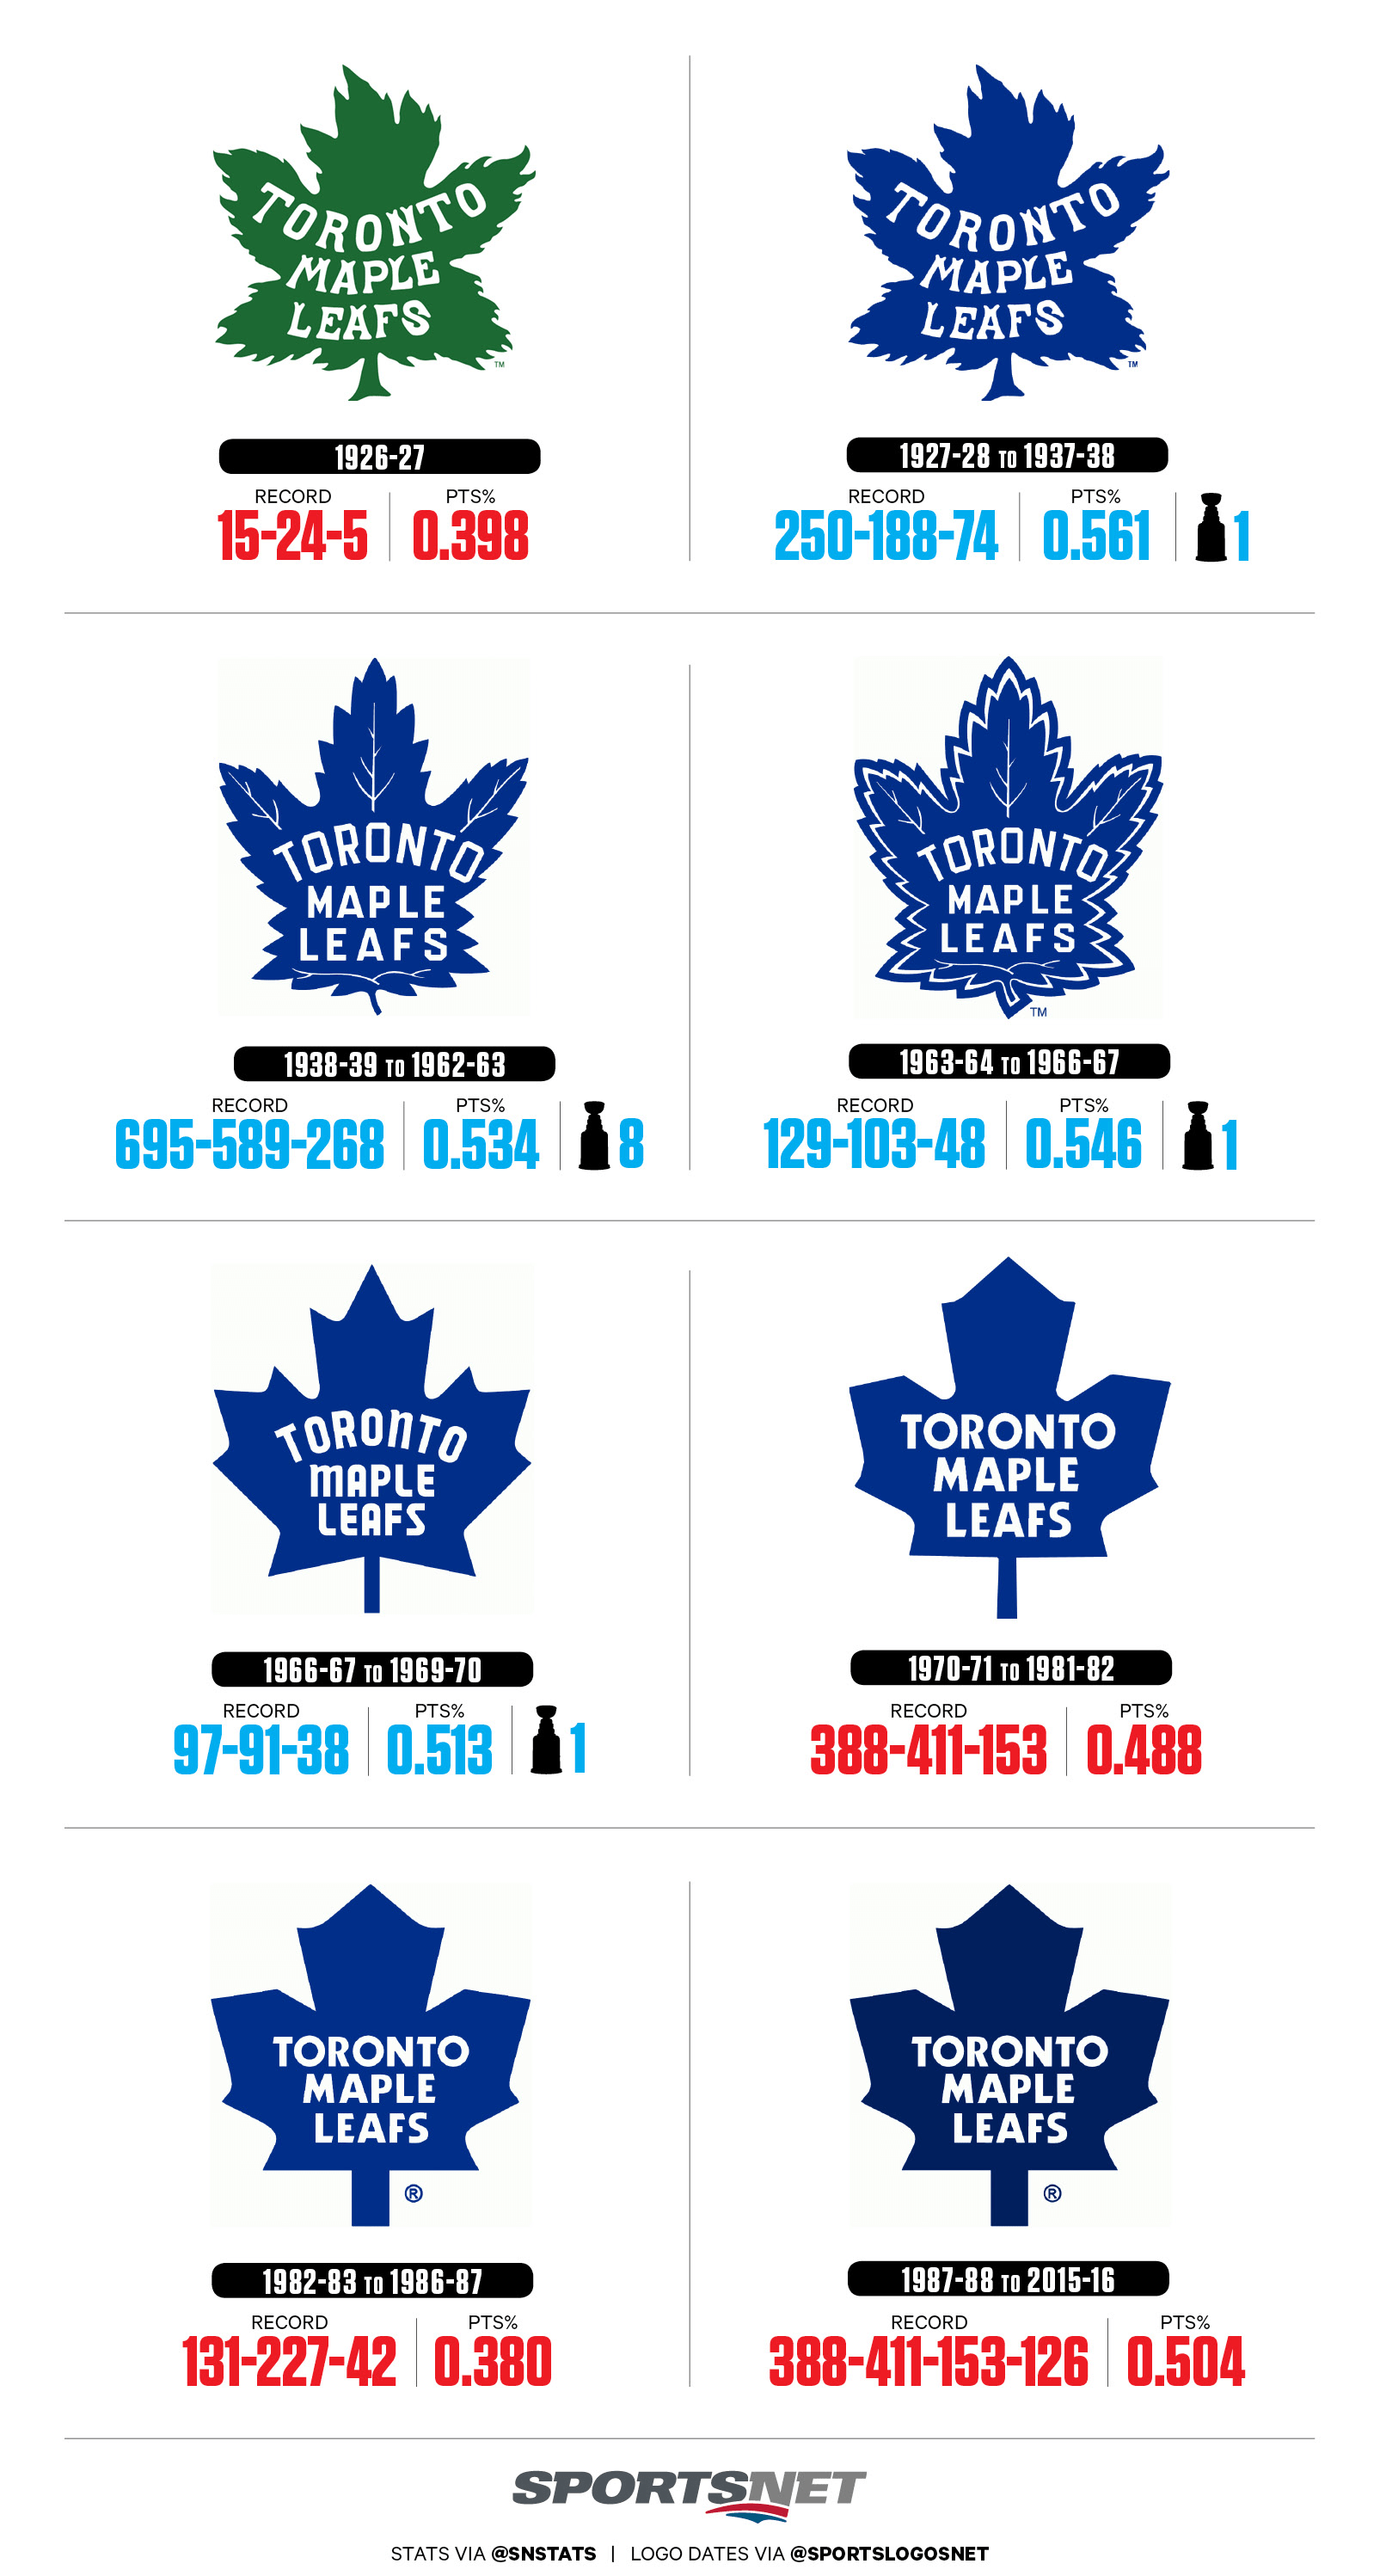 New Maple Leafs Logo - Twitter reaction to Maple Leafs unveiling new logo